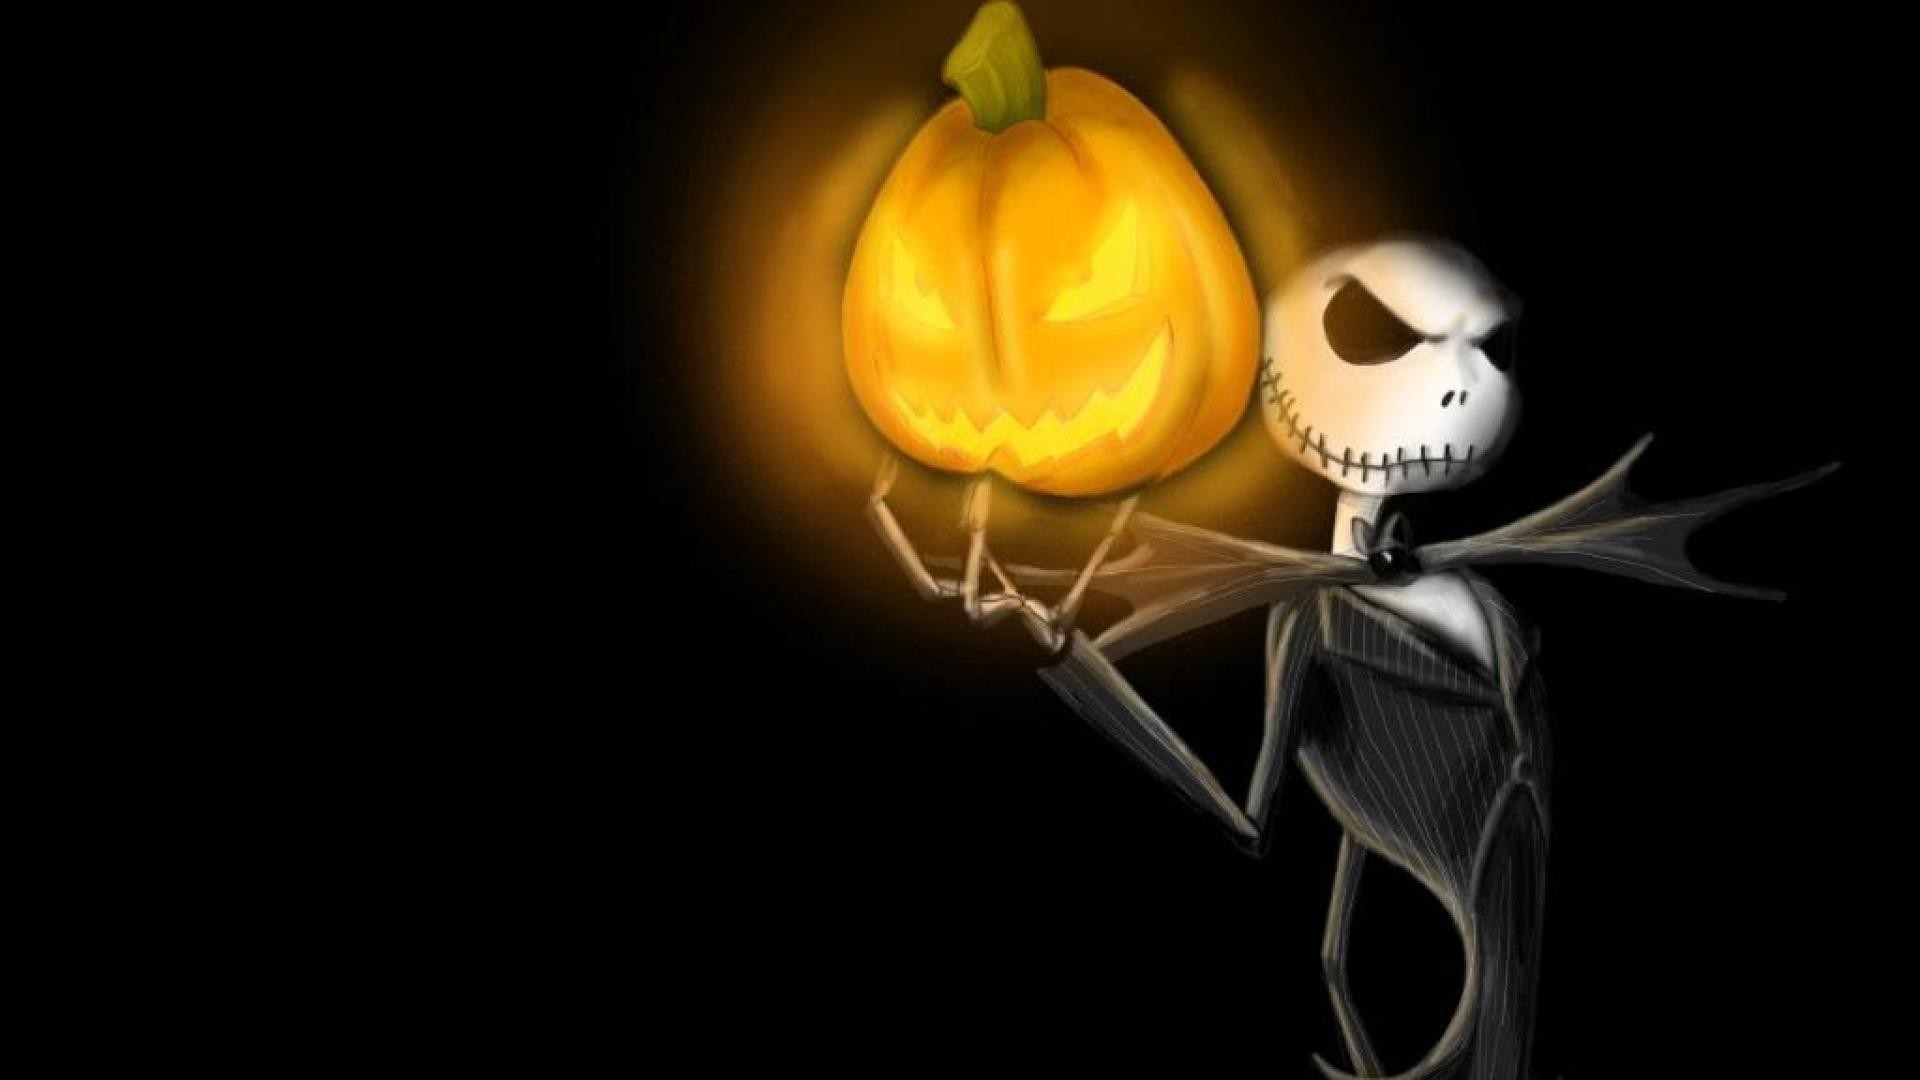 1920x1080 2000x2818 HQ The Nightmare Before Christmas Wallpapers | File 860.22Kb